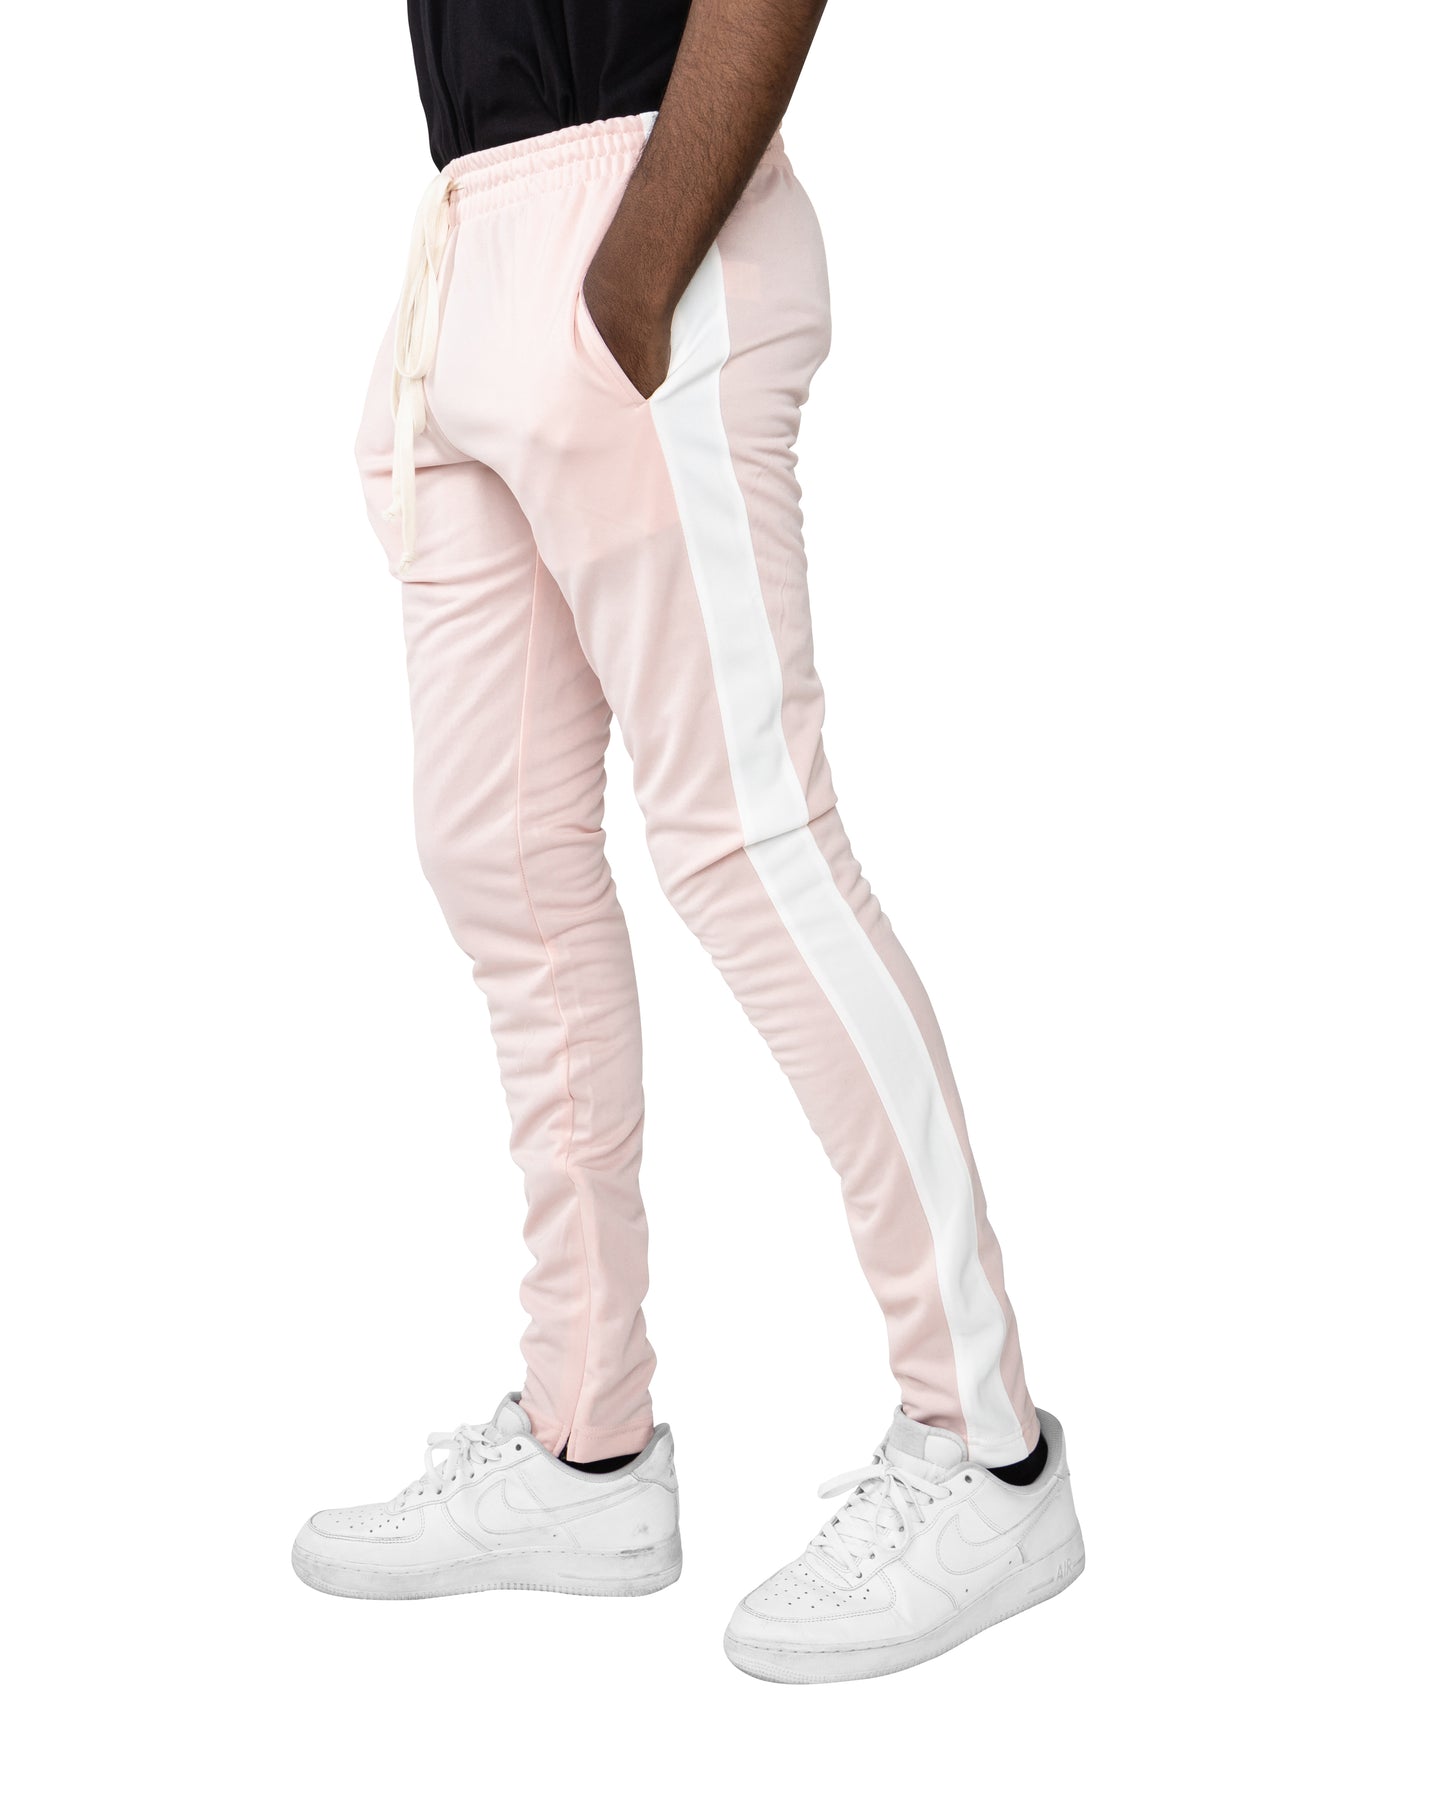 EPTM DUSTY PINK/WHITE-TRACK PANTS